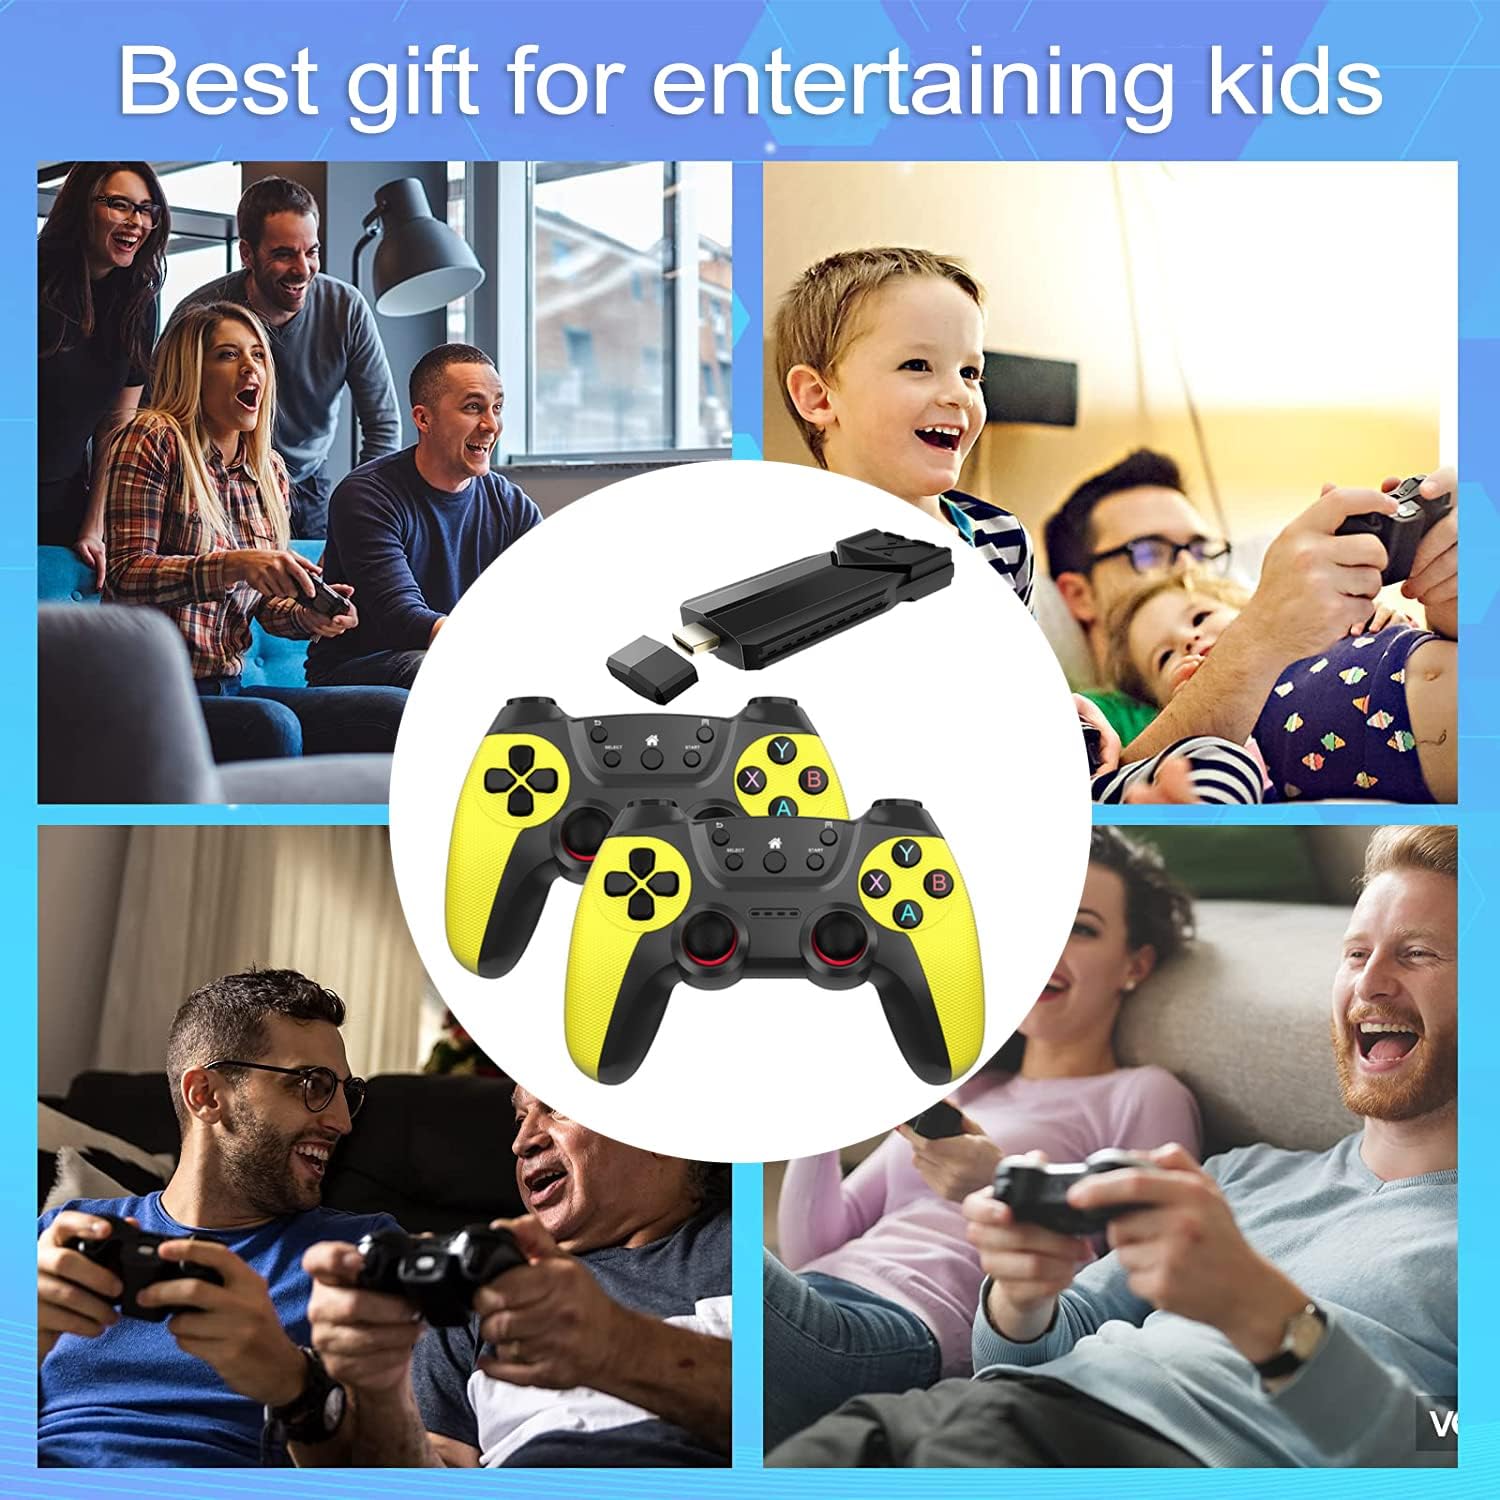 20000+ Games, Wireless Retro Game Console, Handheld Console, Plug and Play Video Game Stick, 9 emulators, 4K HDMI Output, Dual 2.4G Wireless Controllers